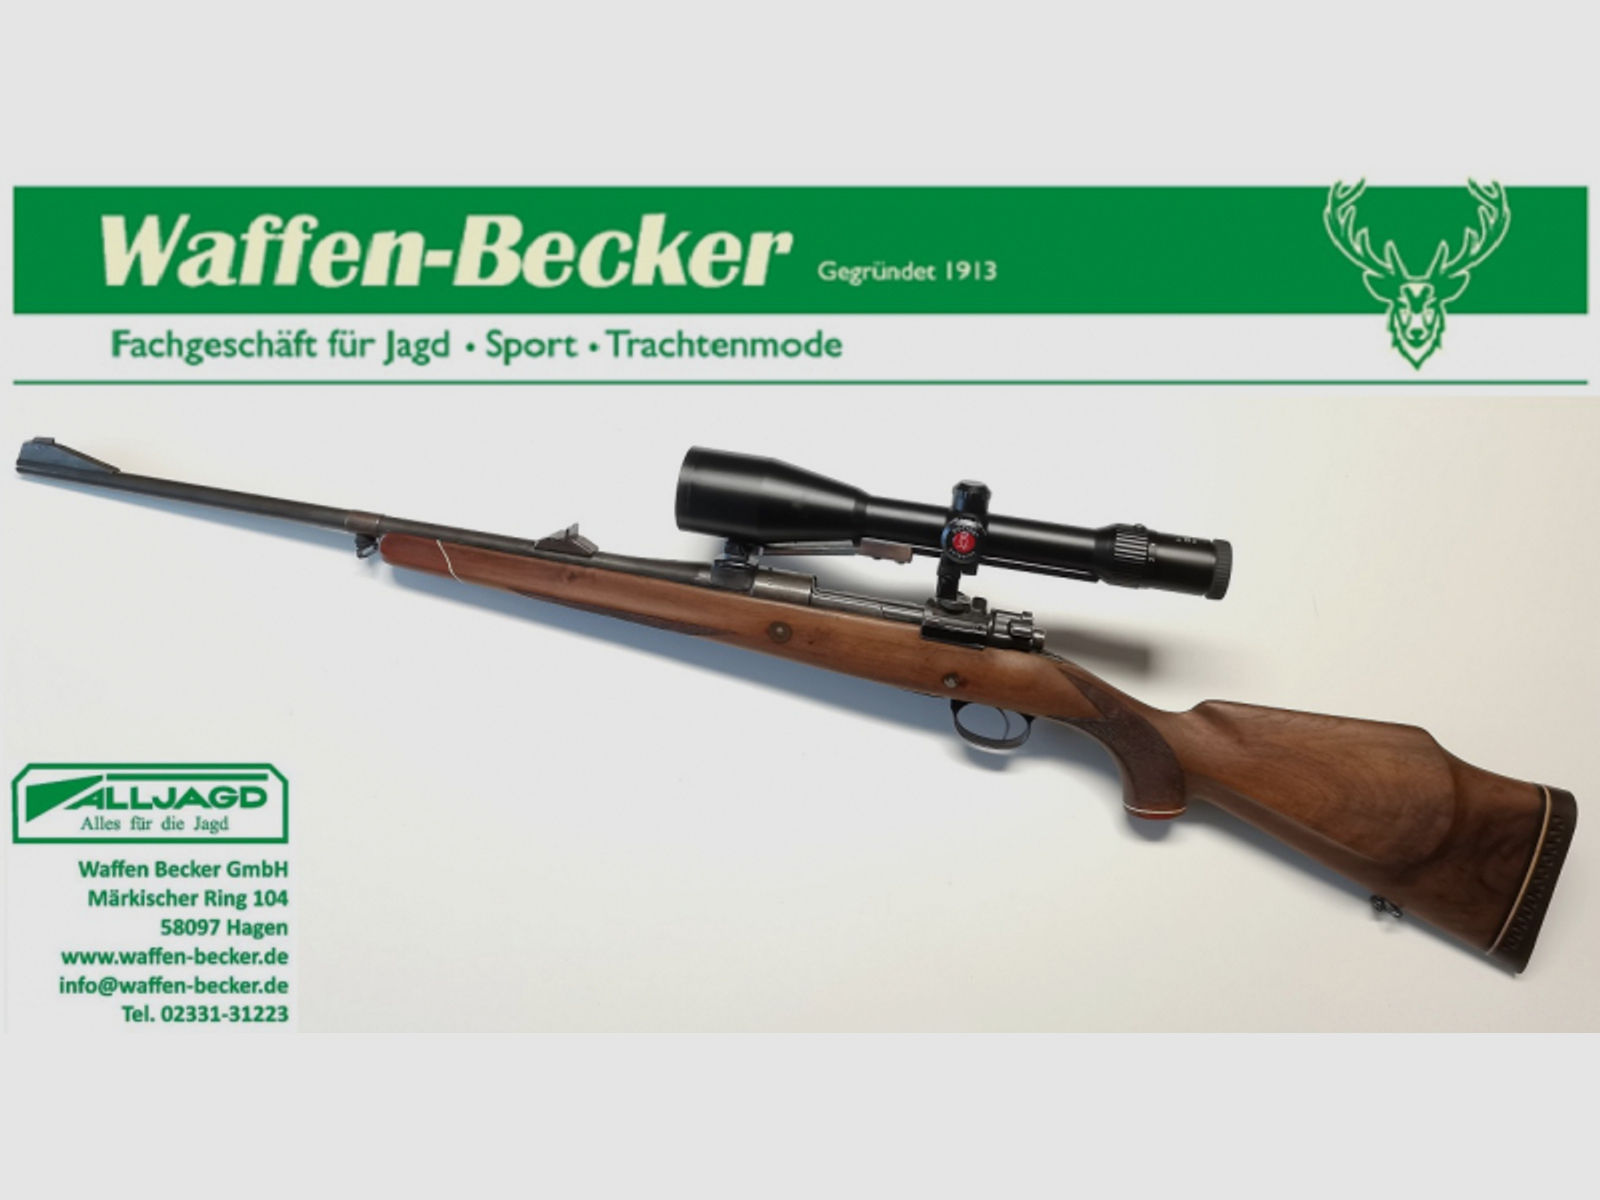 Repetierbüchse FN-Browning Mod. 98 Jagd Kal. 9,3x62 + ZF Docter 3-12x56 Abs. 4-0